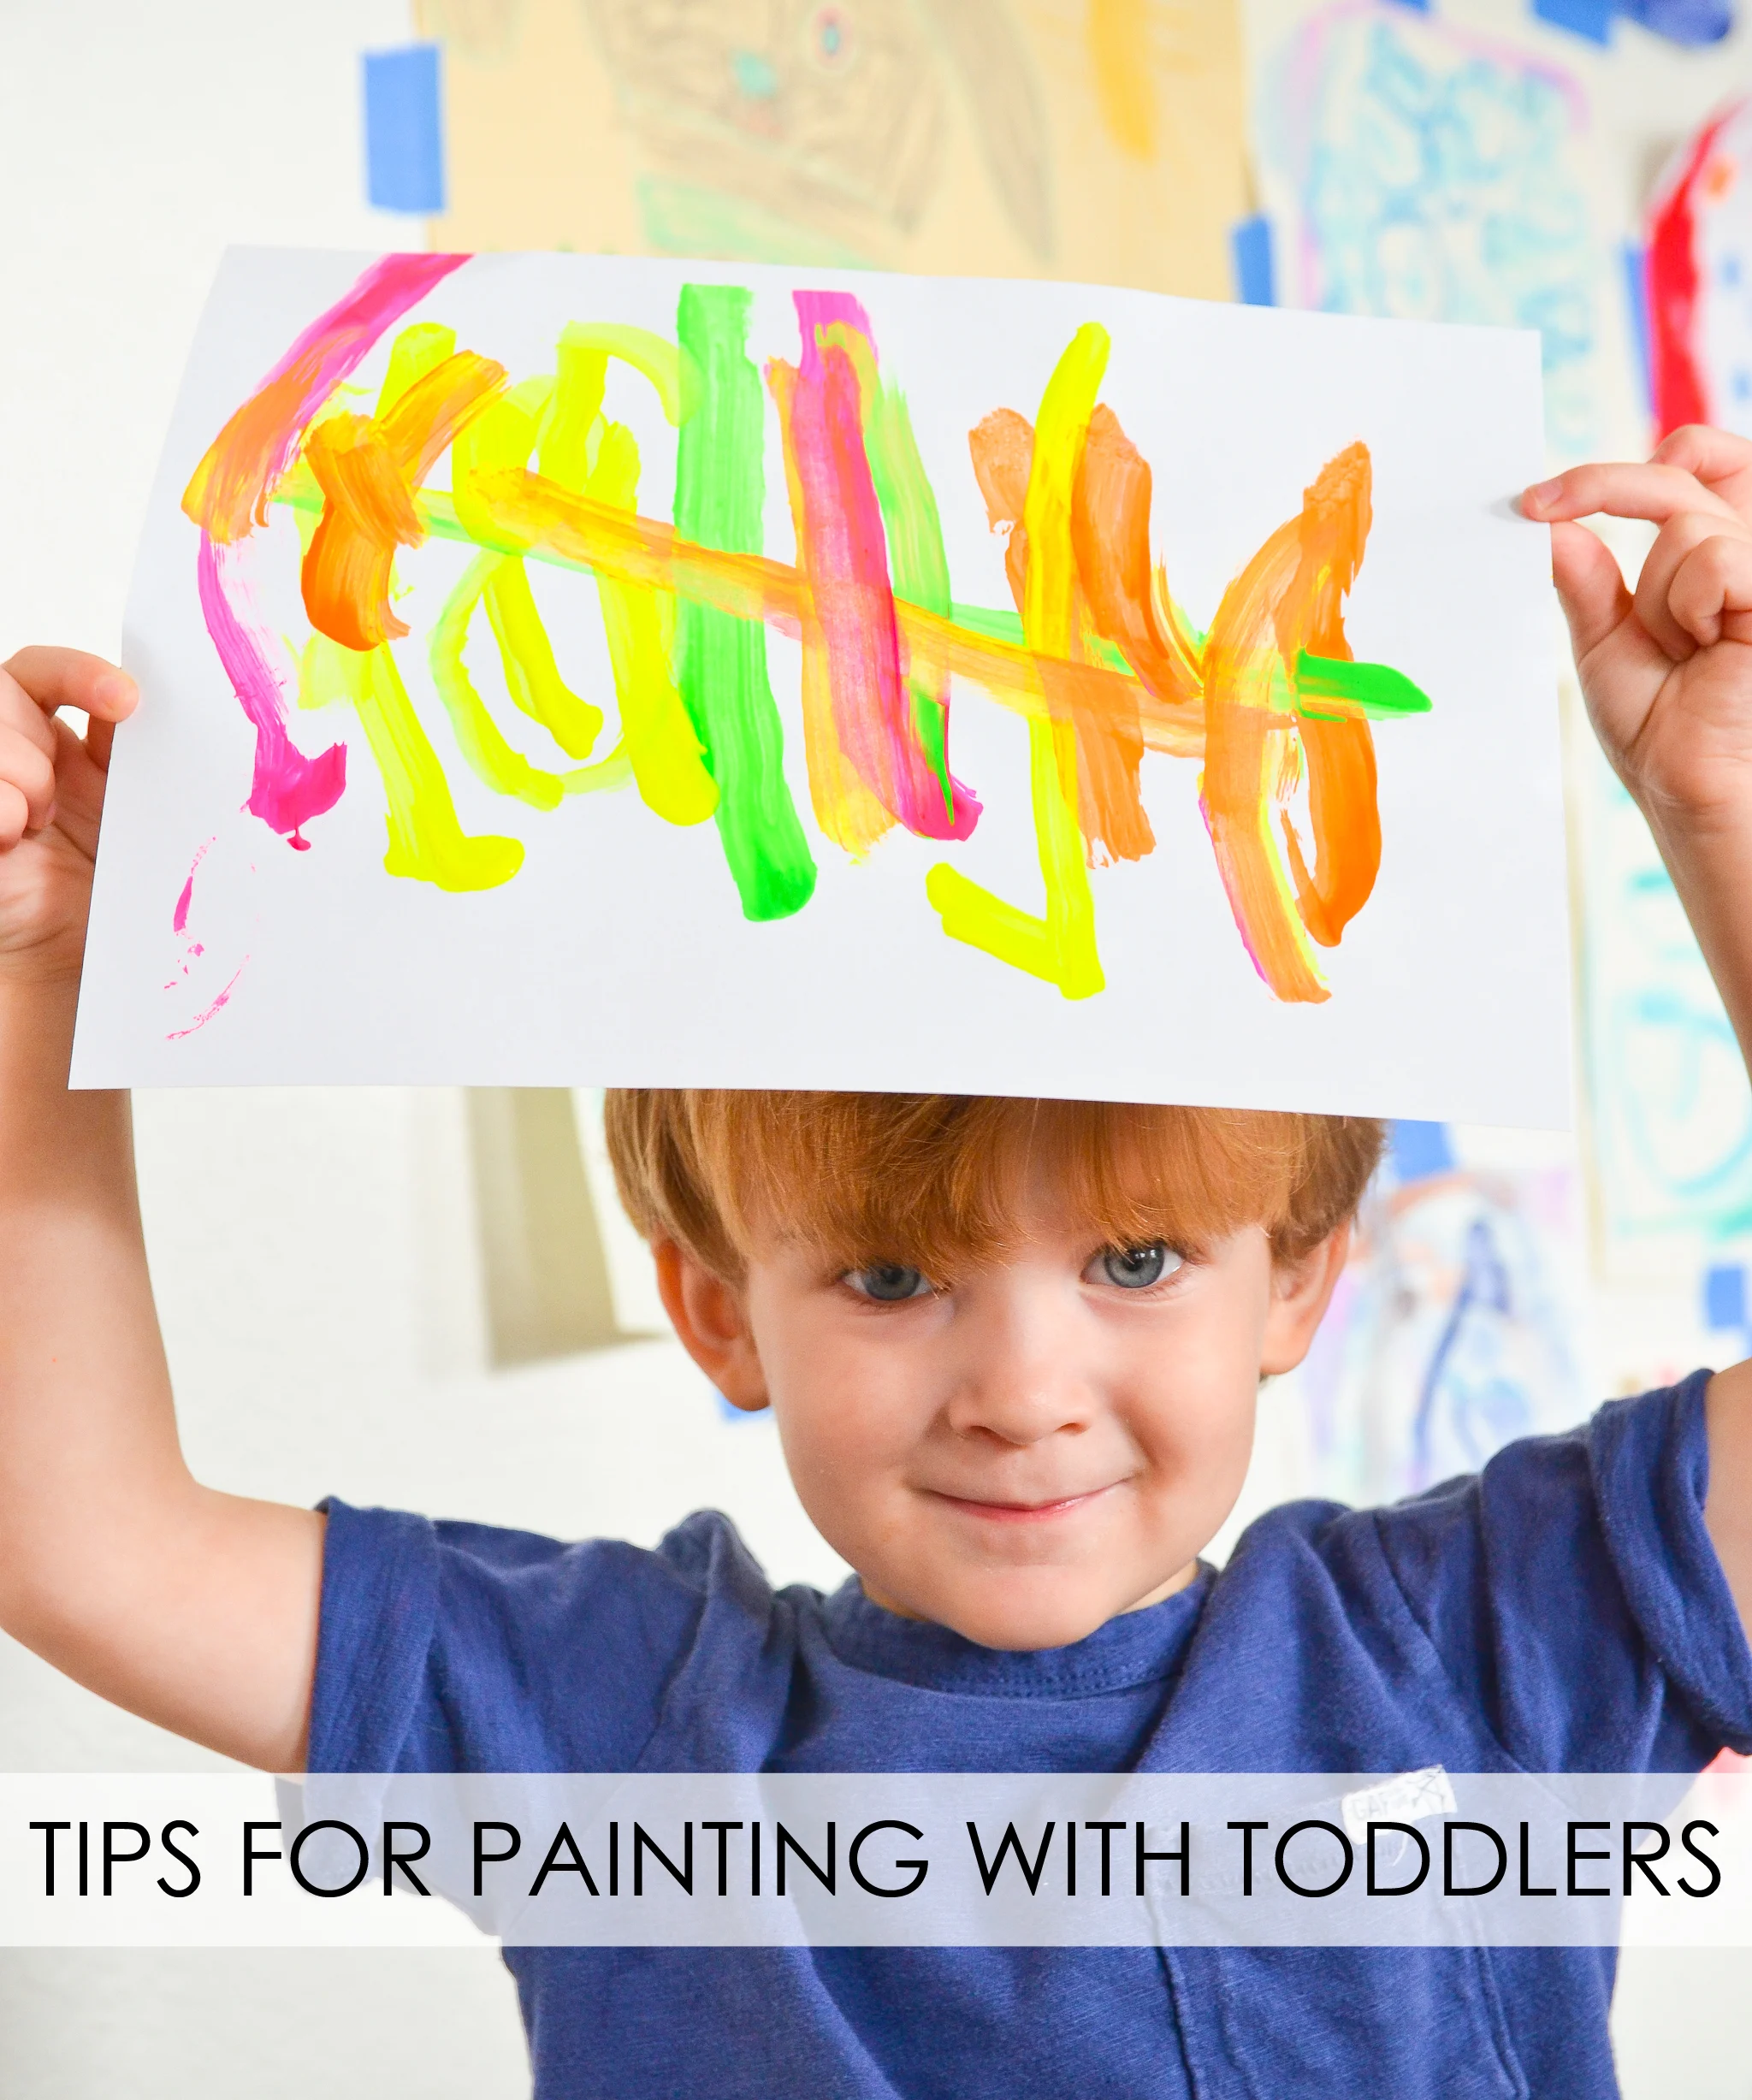 5 Tips For Painting With Toddlers - Oh Creative Day